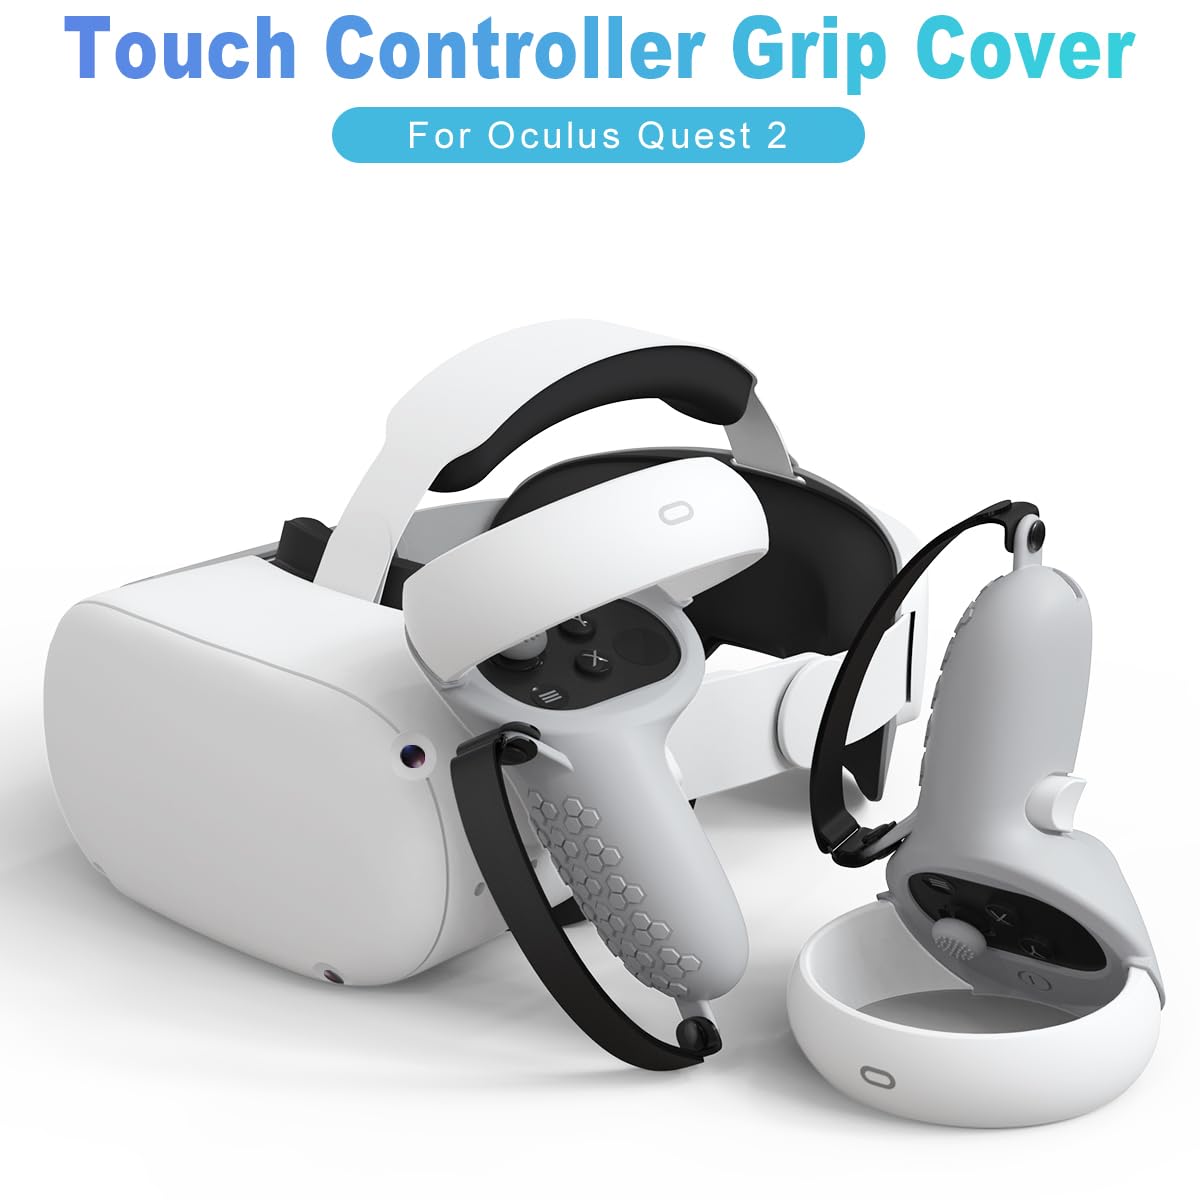 AMZDM Controller Grip for Oculus Meta Quest 2 Accessories Grips Cover for VR Touch Controllers Covers Protector with Non-Slip Joystick Covers 1Pair (Gray)